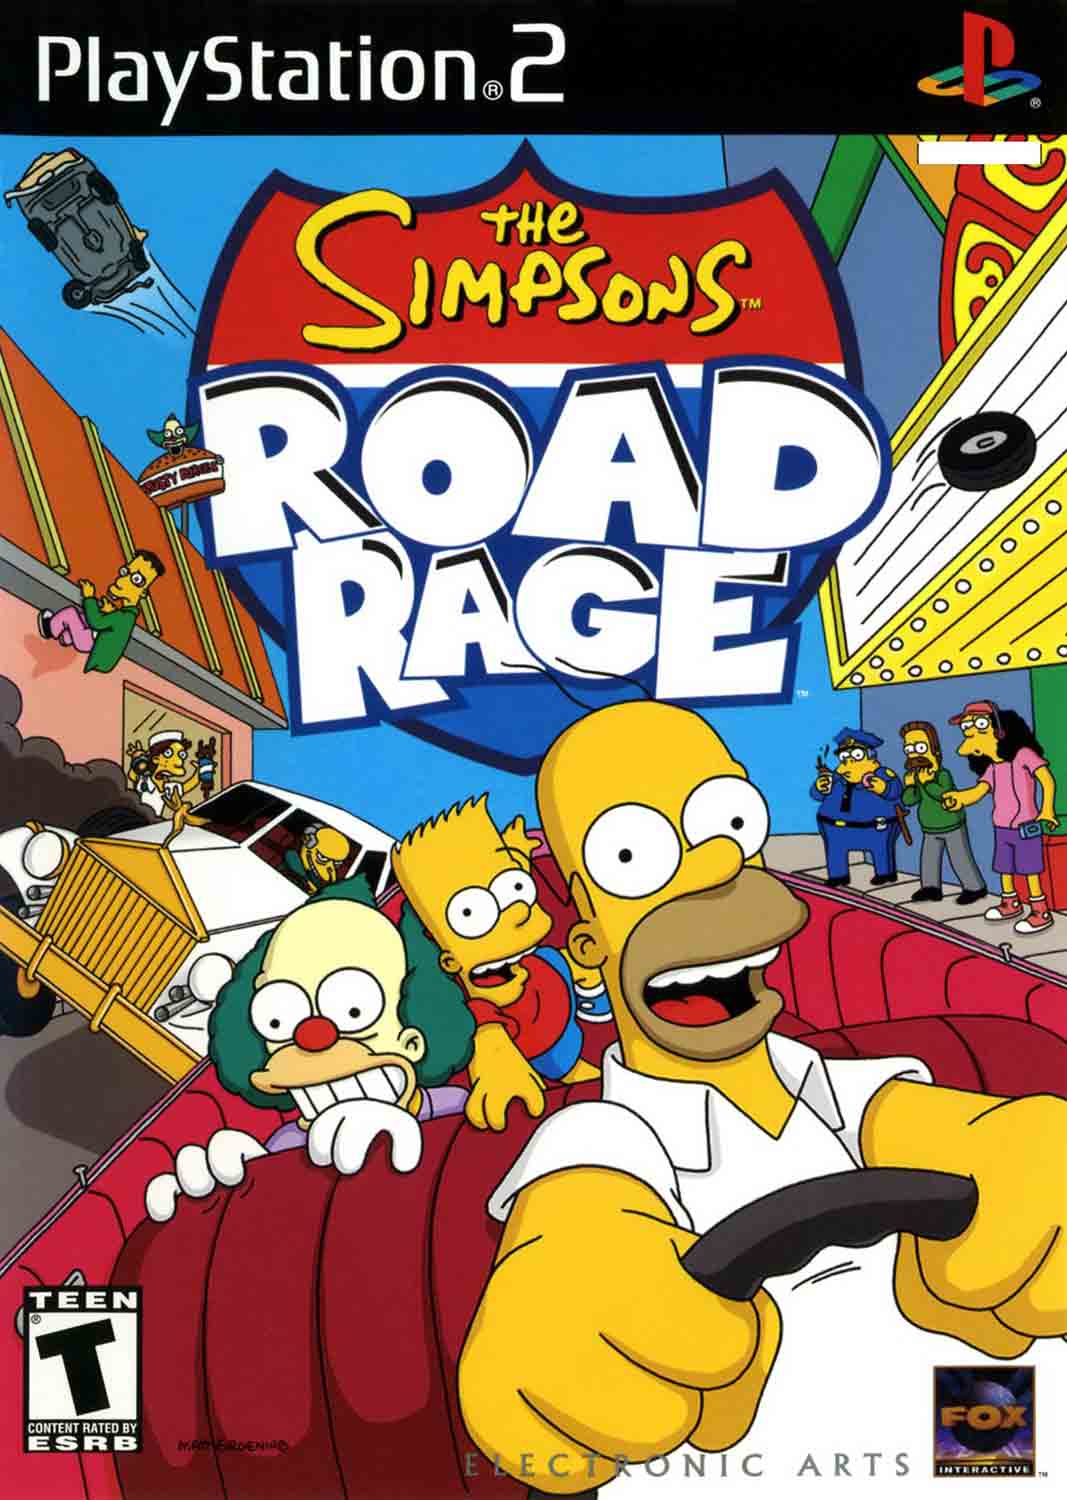 Hra The Simpsons: Road Rage pro PS2 Playstation 2 konzole